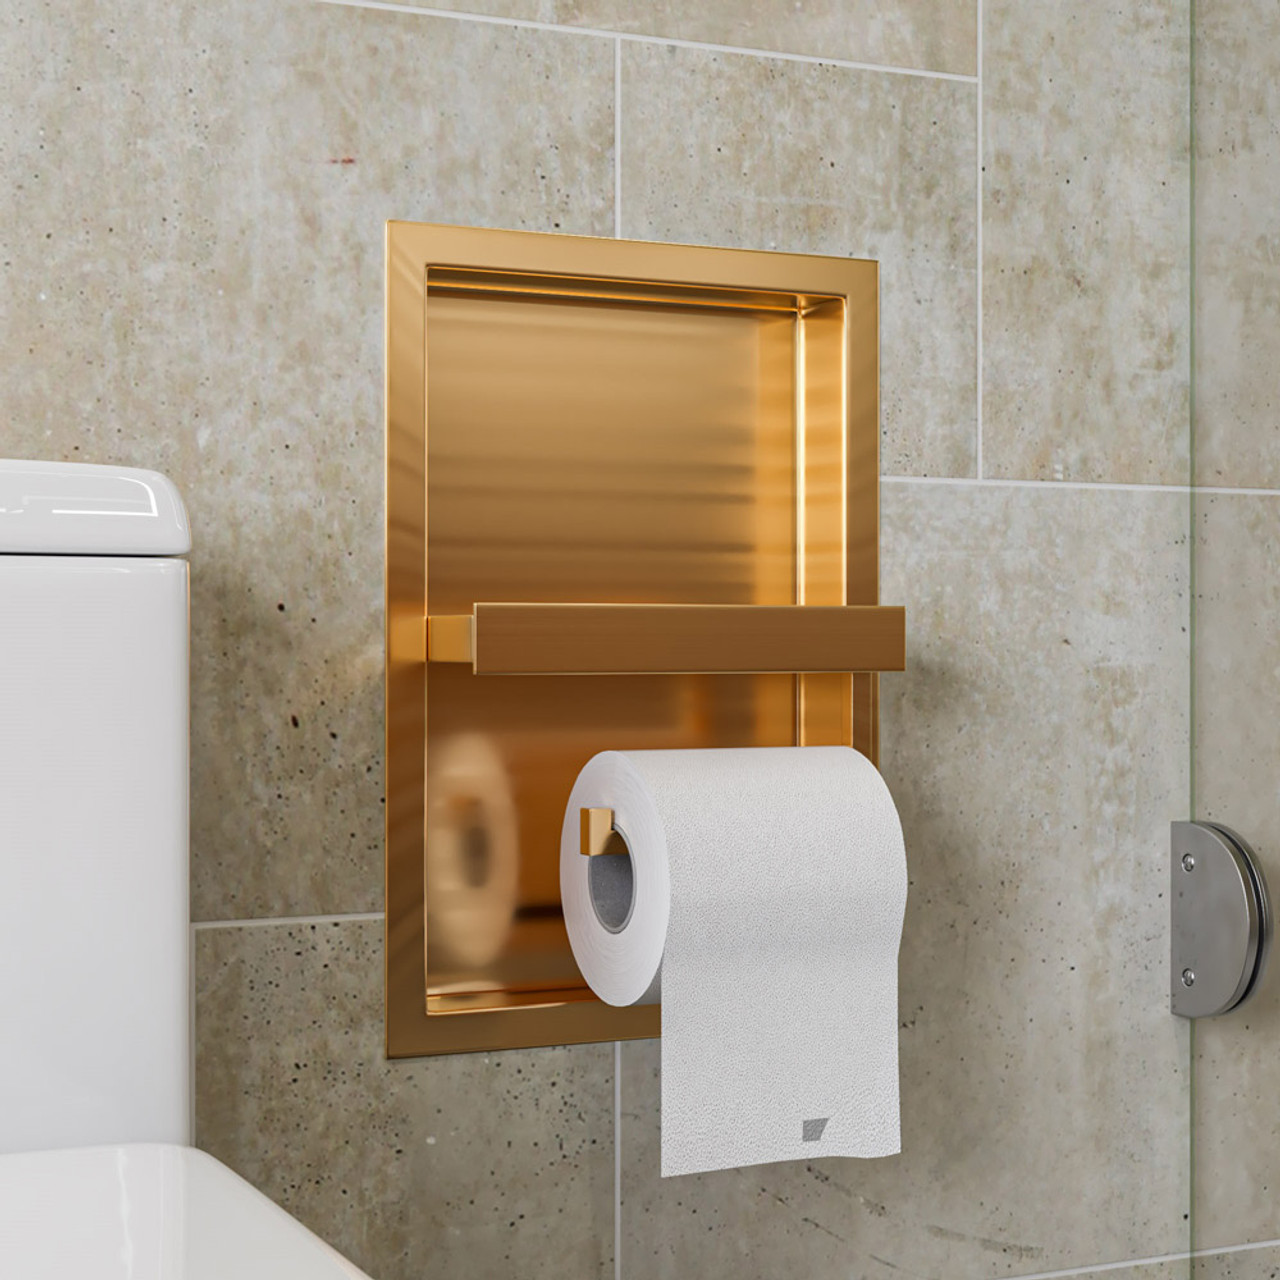 https://cdn11.bigcommerce.com/s-d9g0oj0zhx/images/stencil/1280x1280/products/55593/294548/alfi-brushed-gold-pvd-stainless-steel-recessed-toilet-paper-holder-niche-abtpnp88-bg__29037.1703570490.jpg?c=2